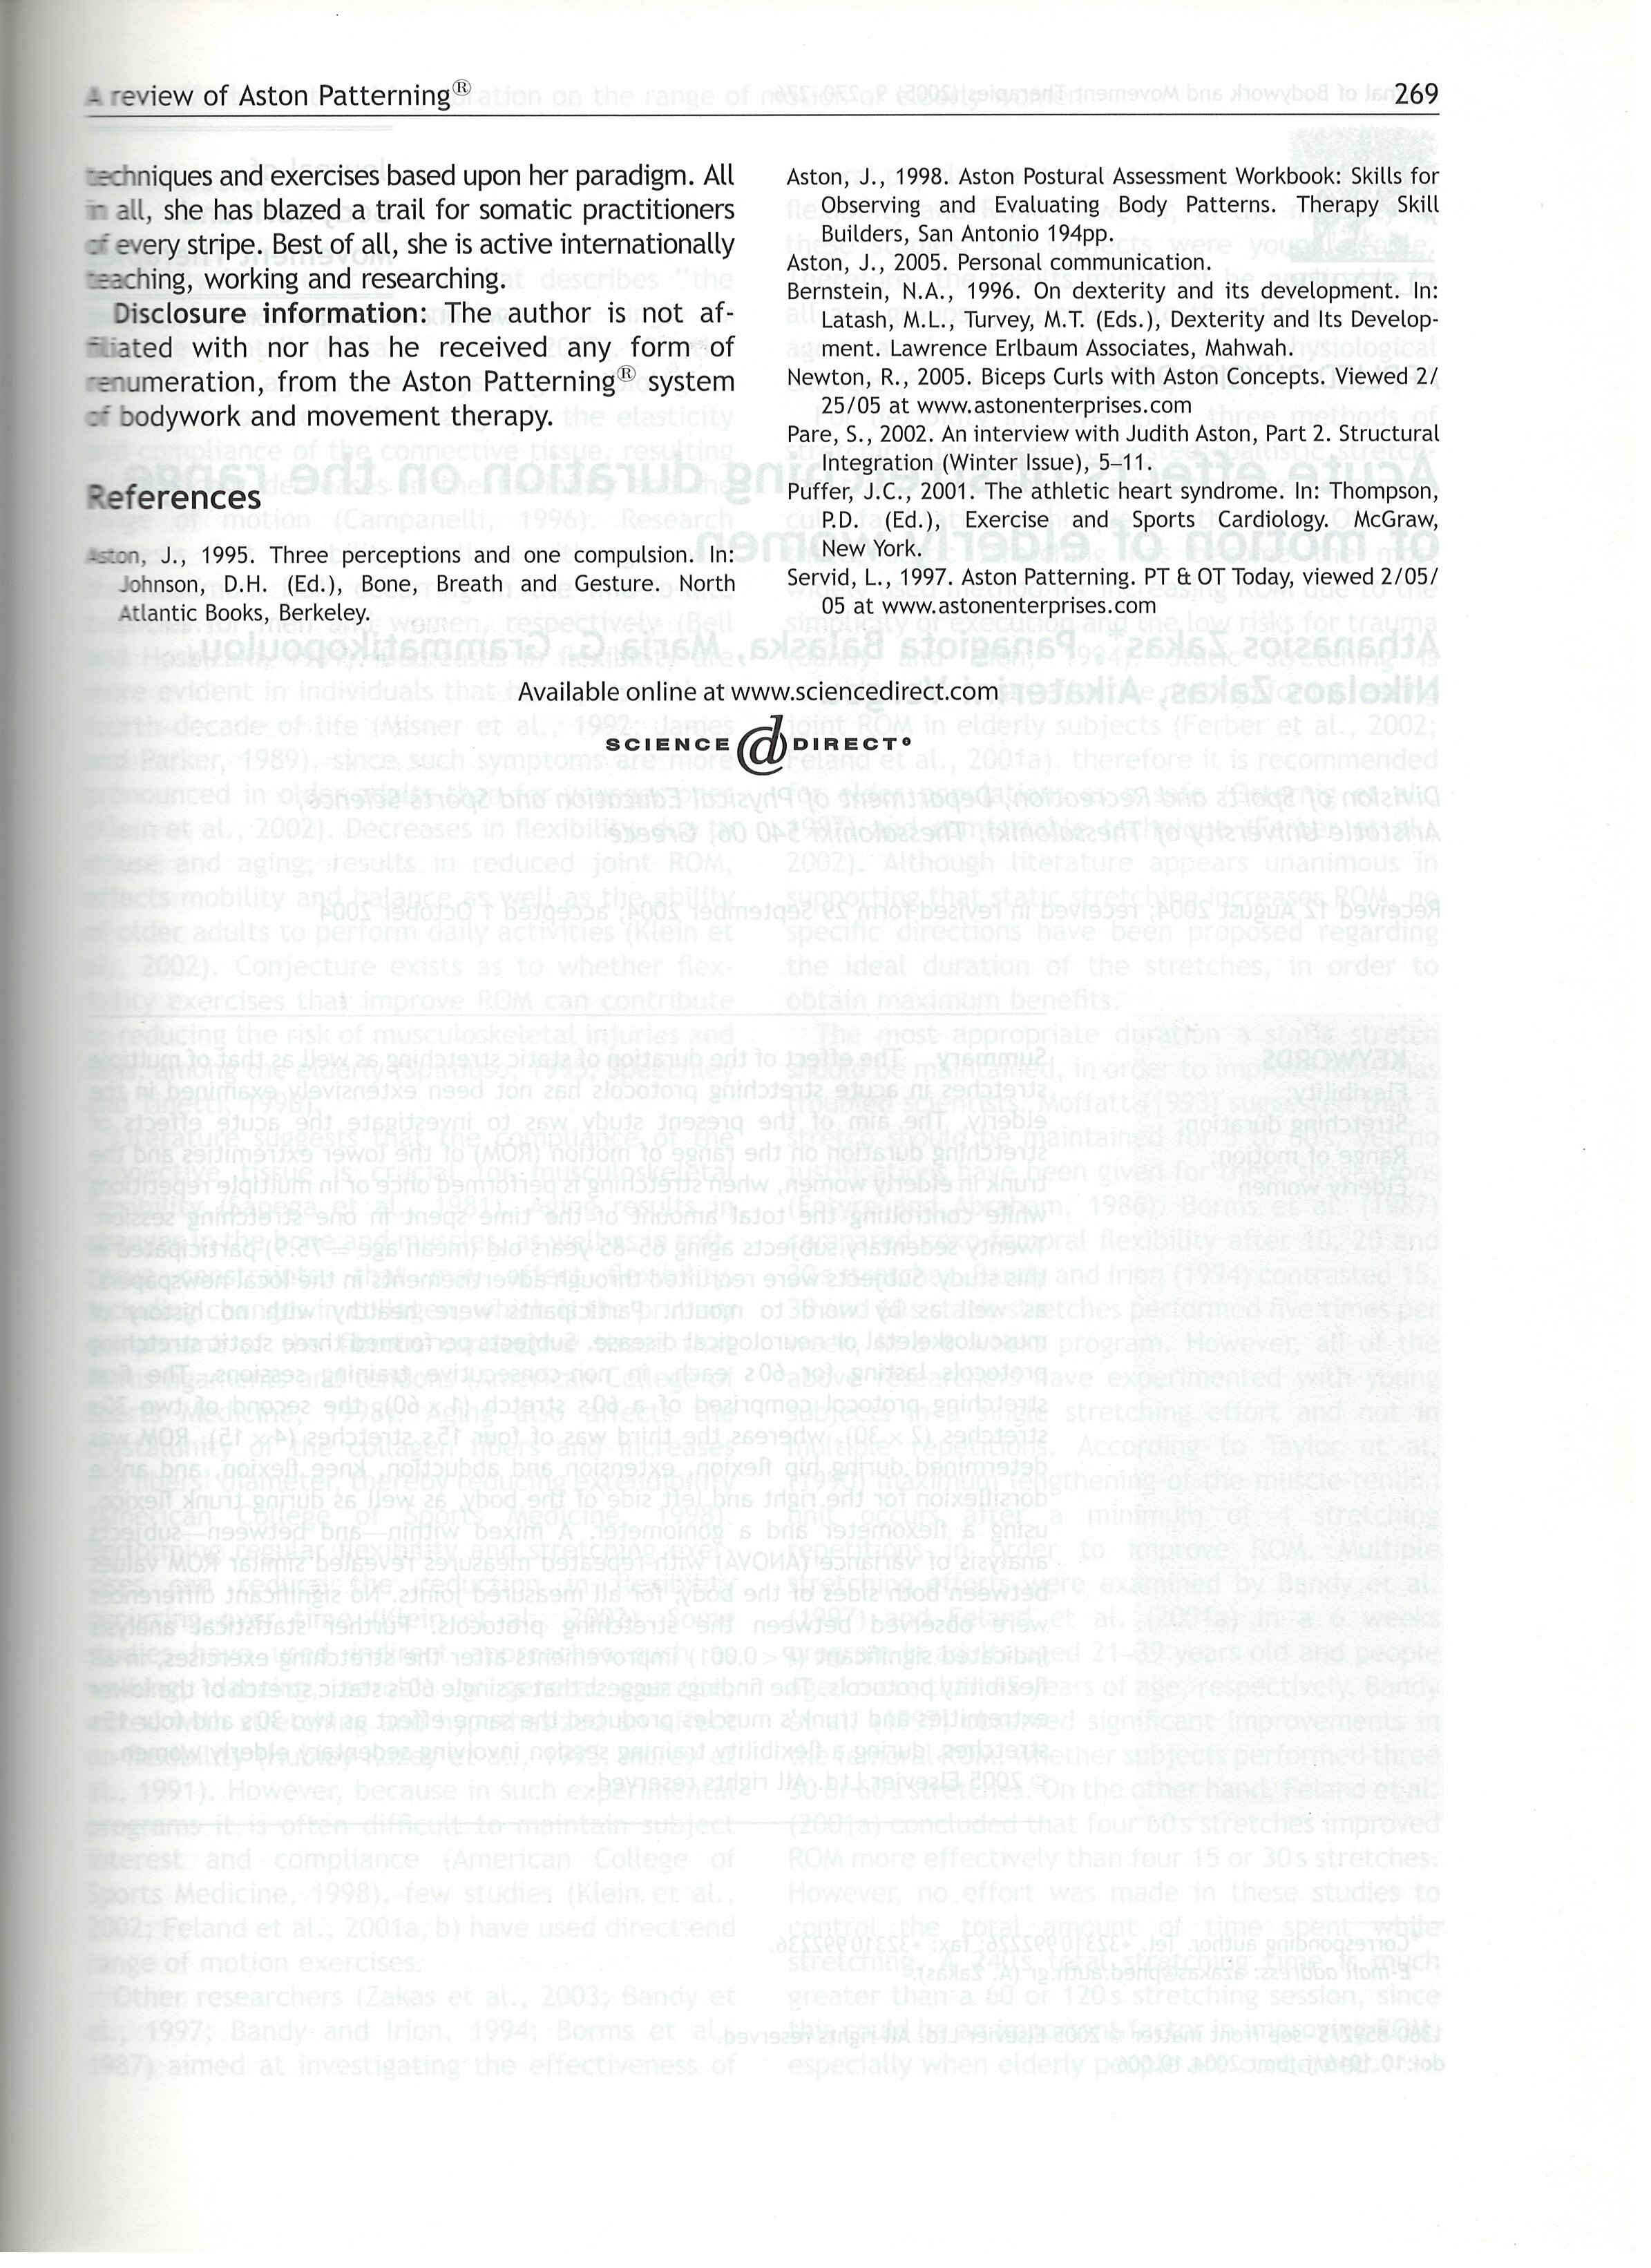 Journal of Bodywork and Movement Therapies 2005.10.jpg